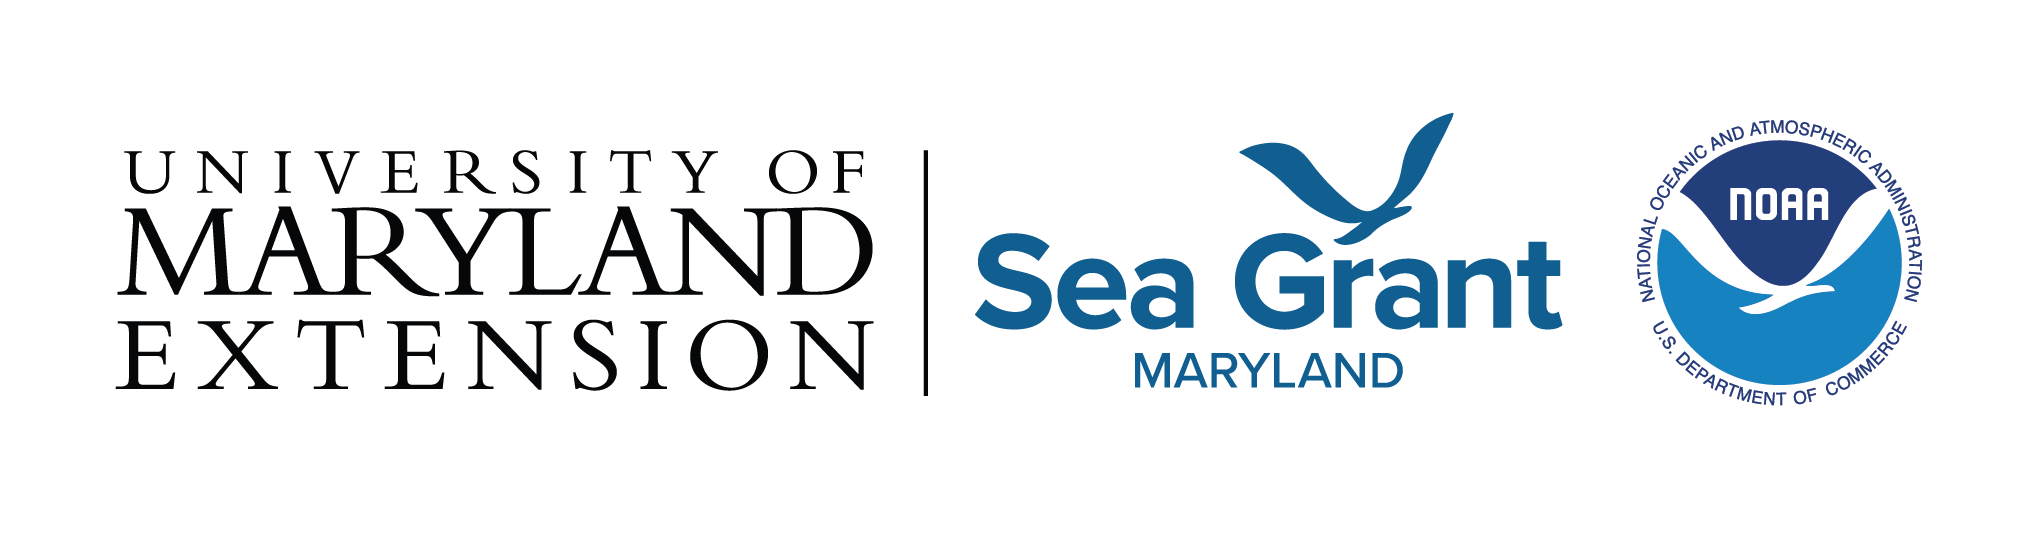 University of Maryland Extension and Maryland Sea Grant logo